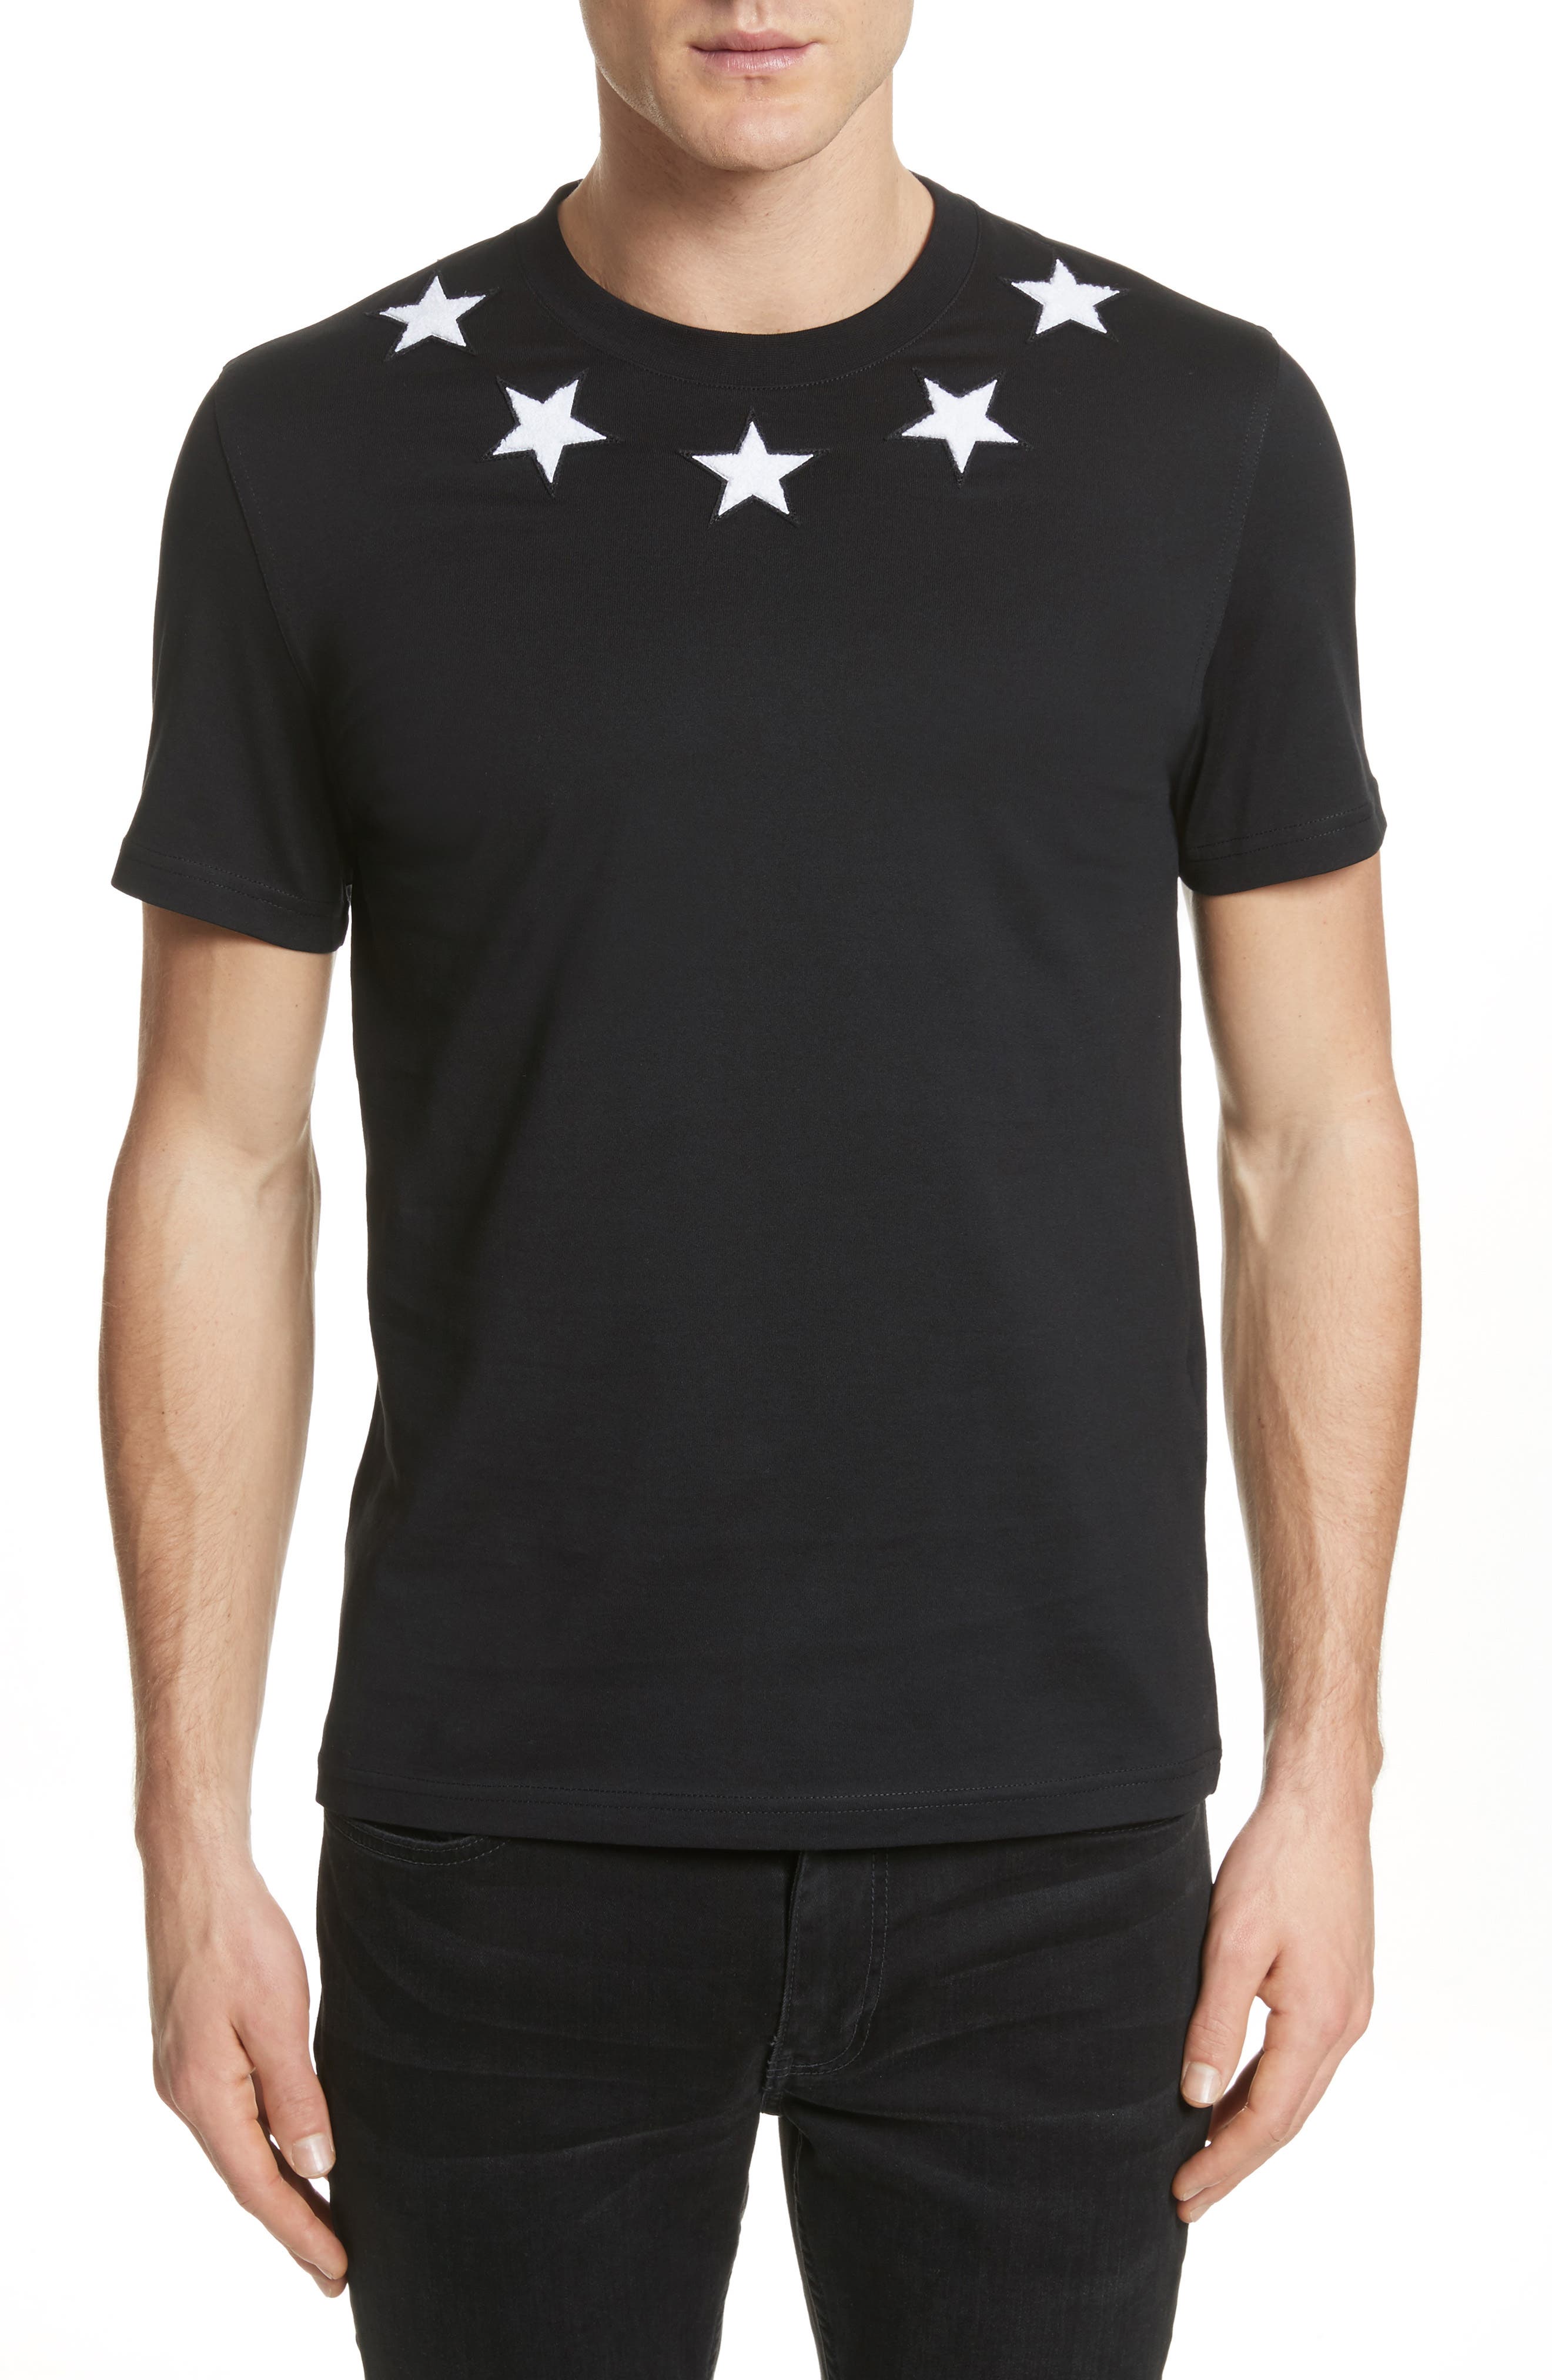 Buy t shirt givenchy - 52% OFF!